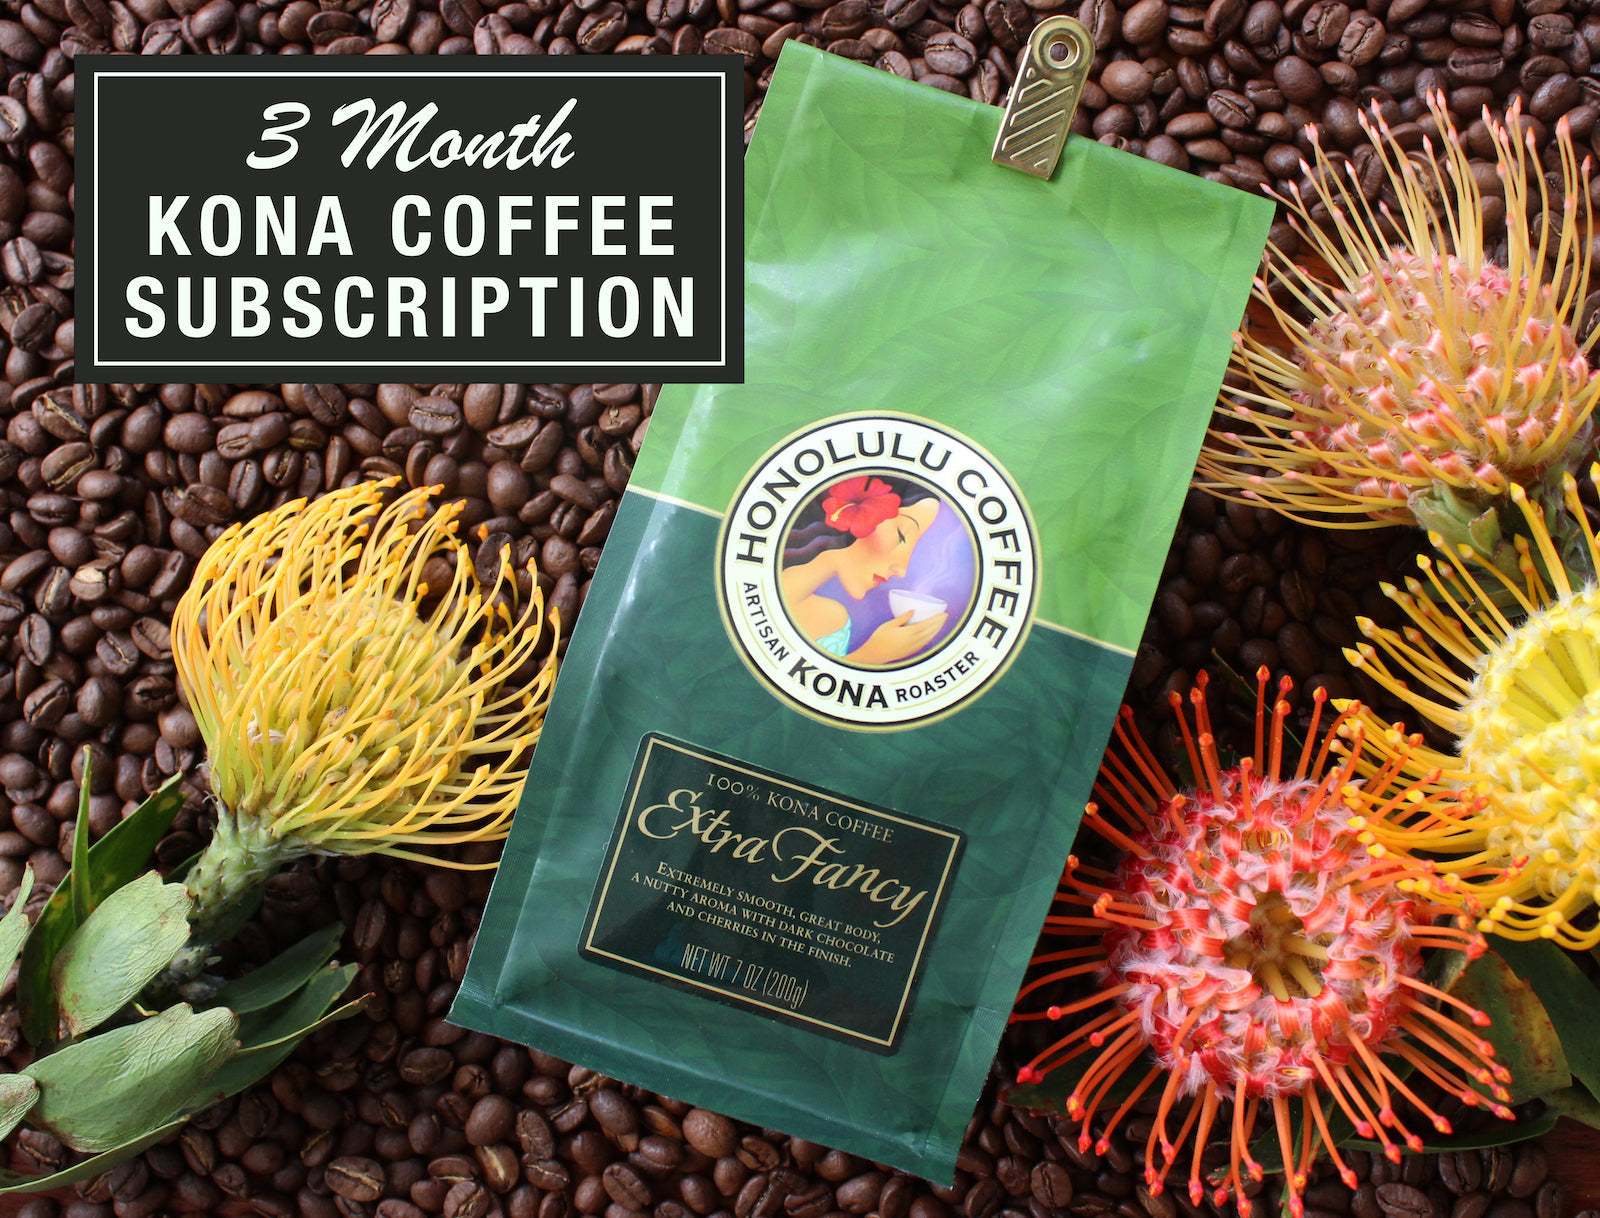 3 Month Kona Coffee subscription - with bag of 100% Kona Extra Fancy